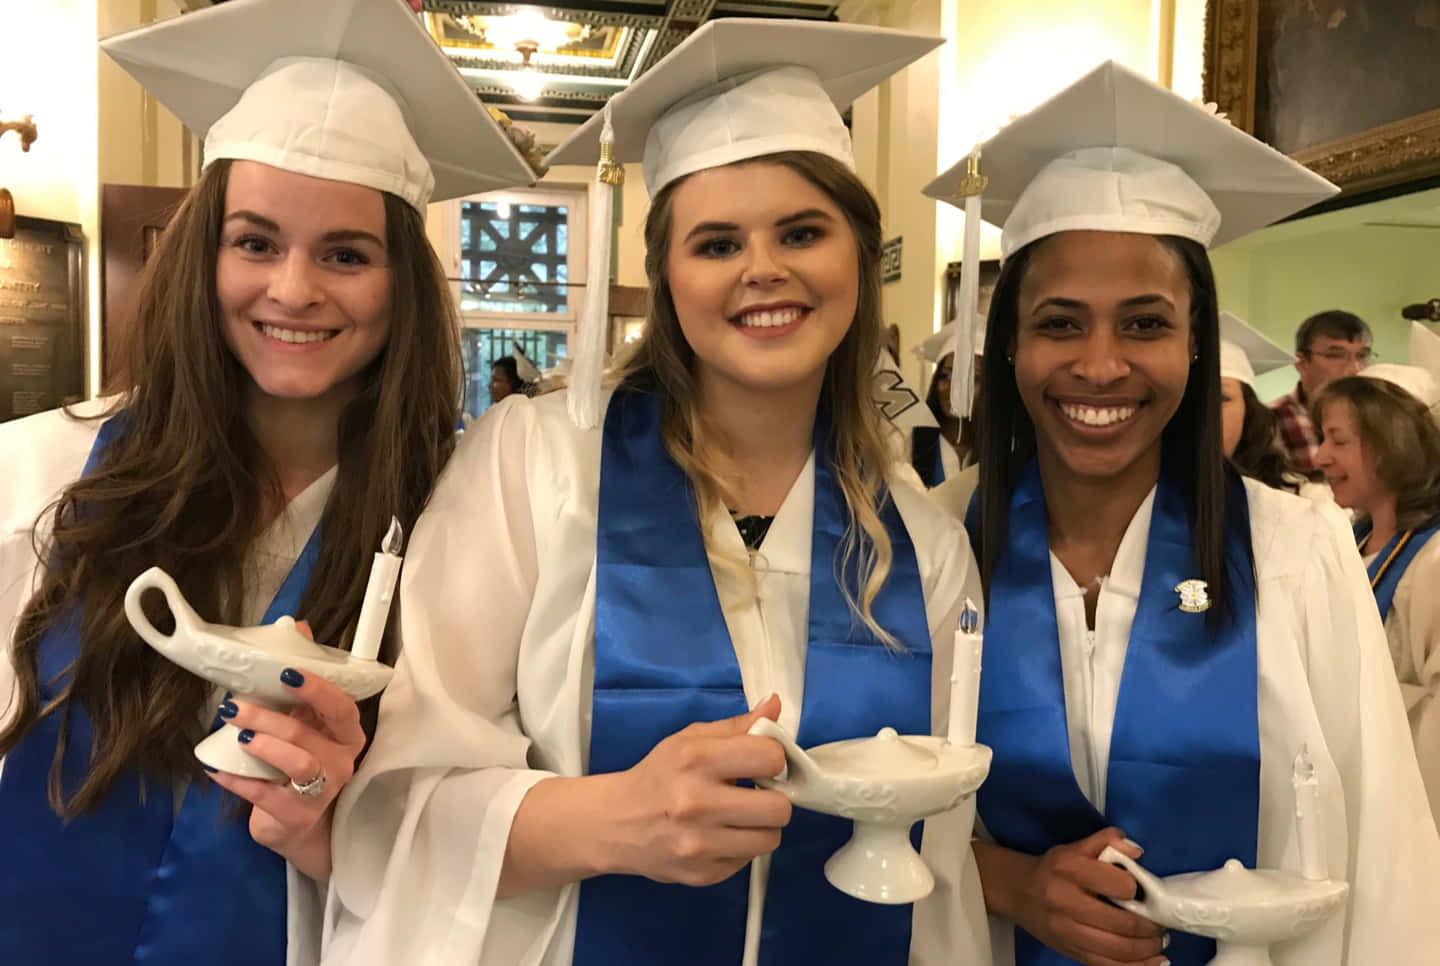 Three Women In Graduation Gowns Holding Cups